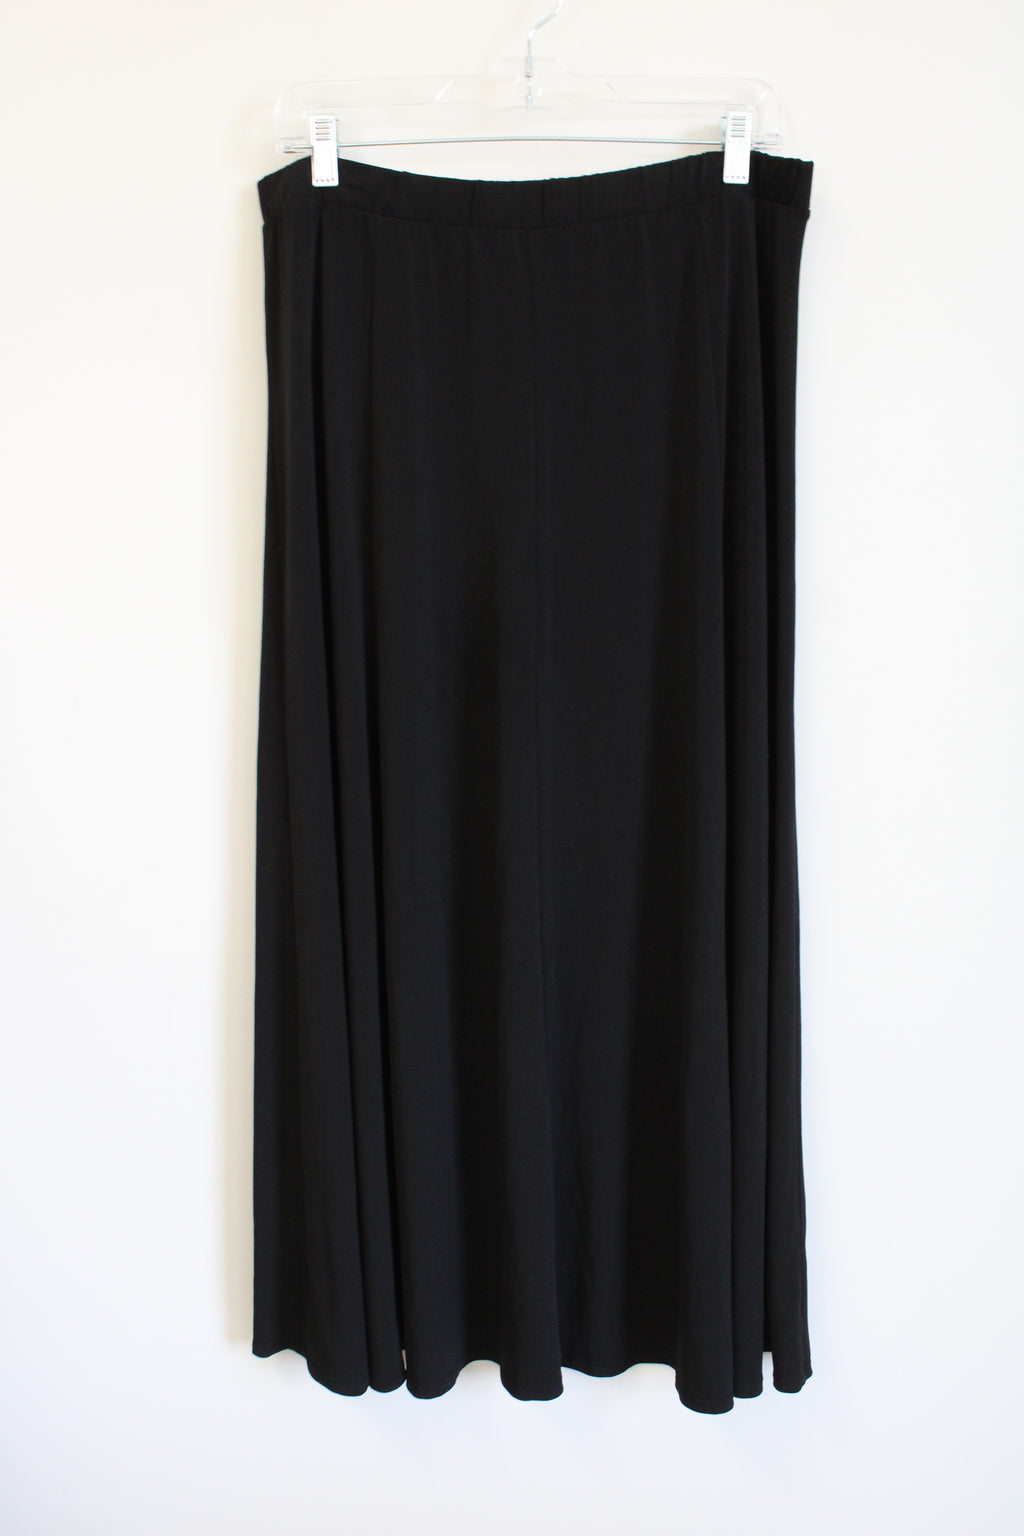 NY Collection Black Stretch Skirt | XL